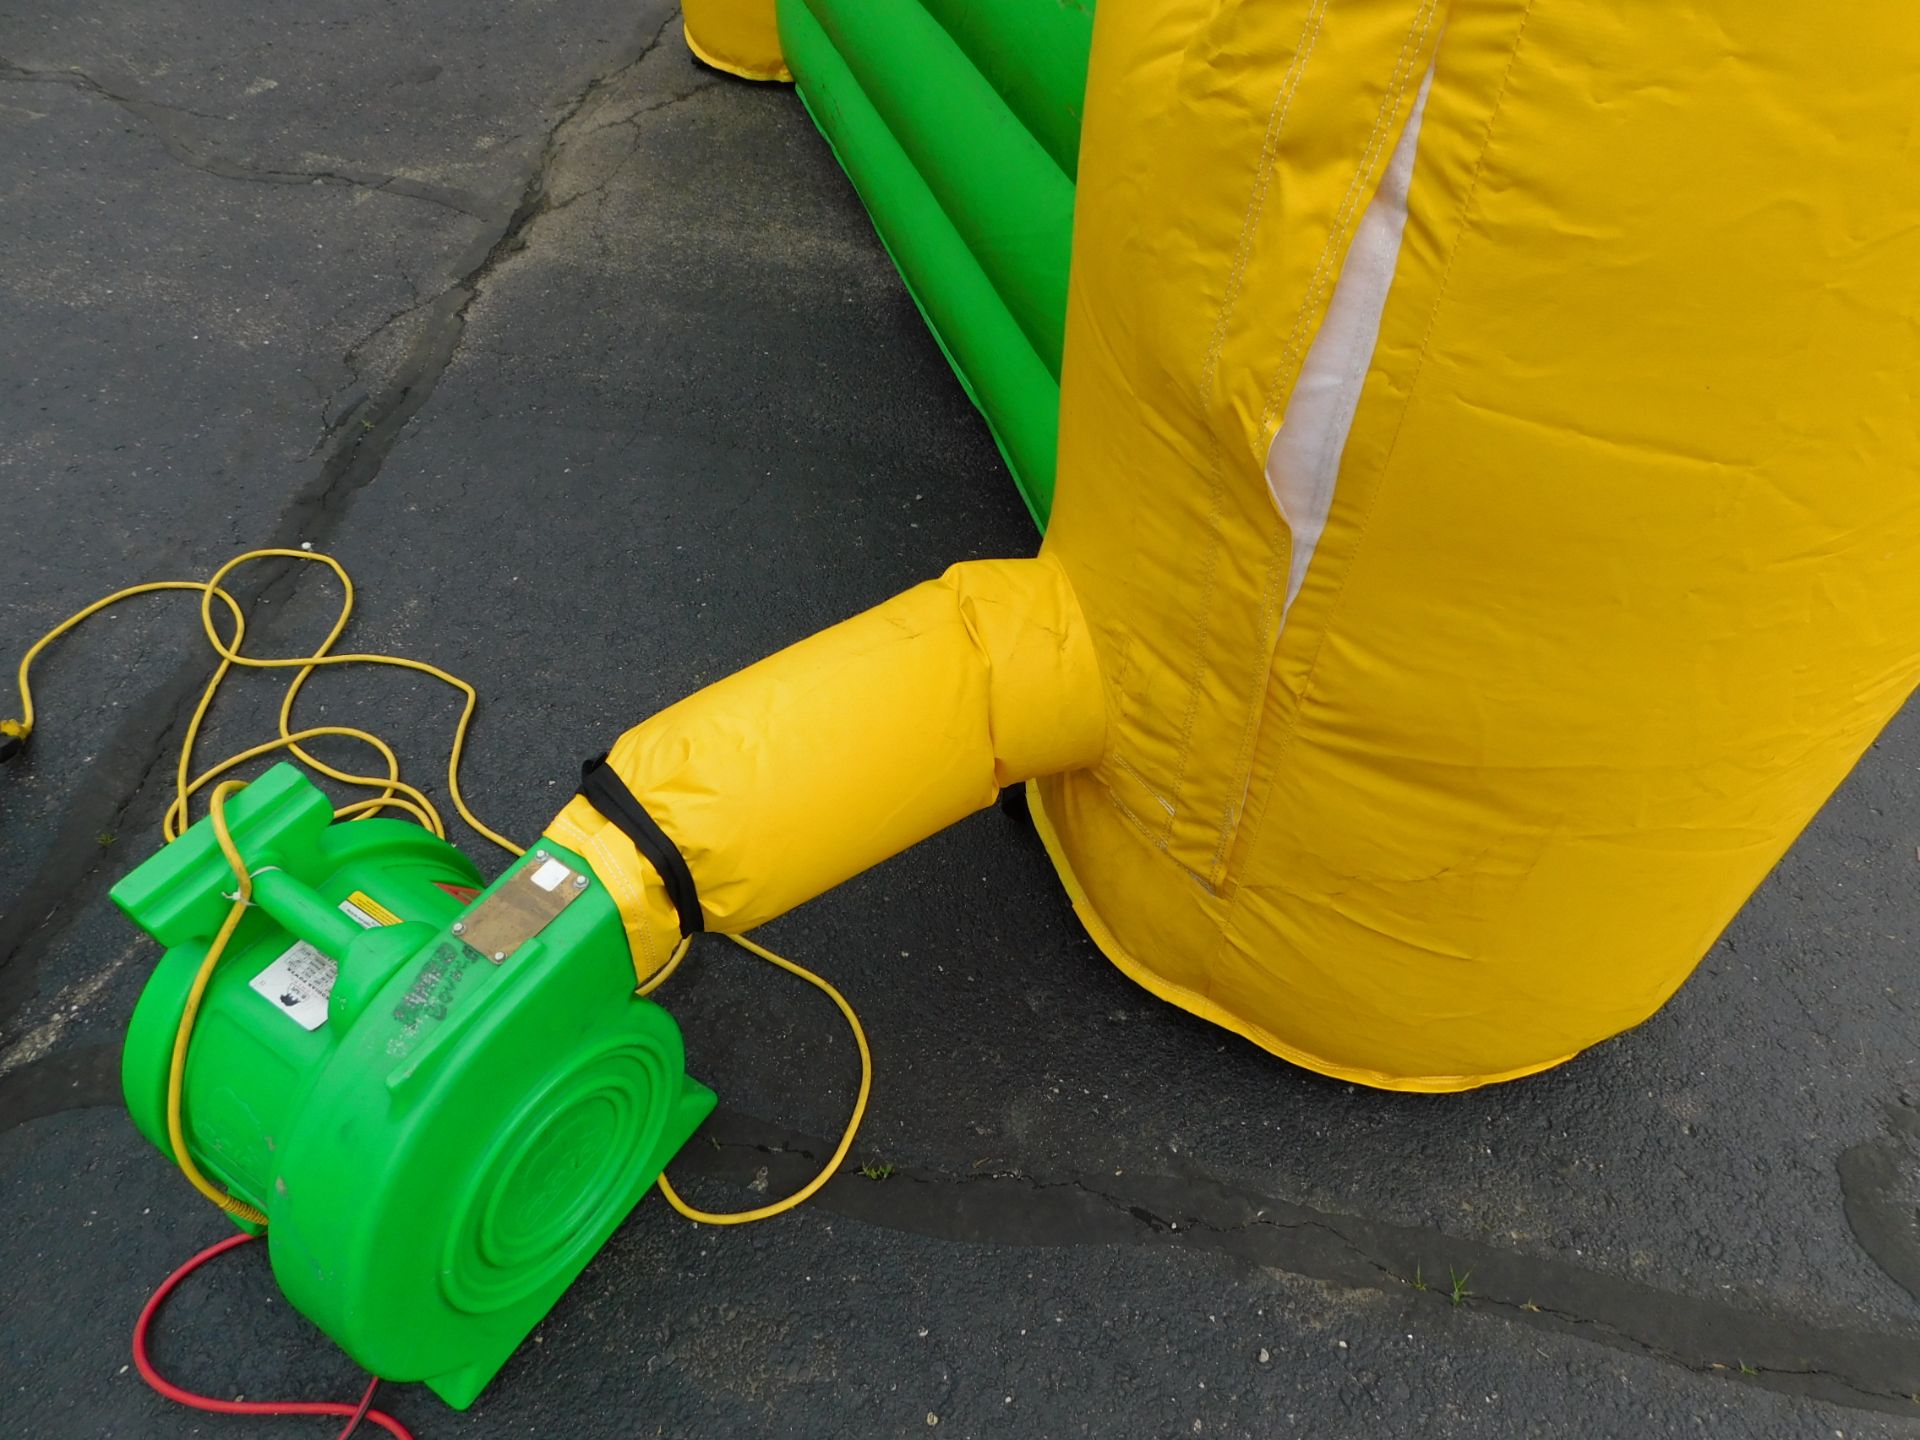 Palm Tree Dislpay Inflatable 12'WX3'LX10'H 1 Blower req. - Image 6 of 6